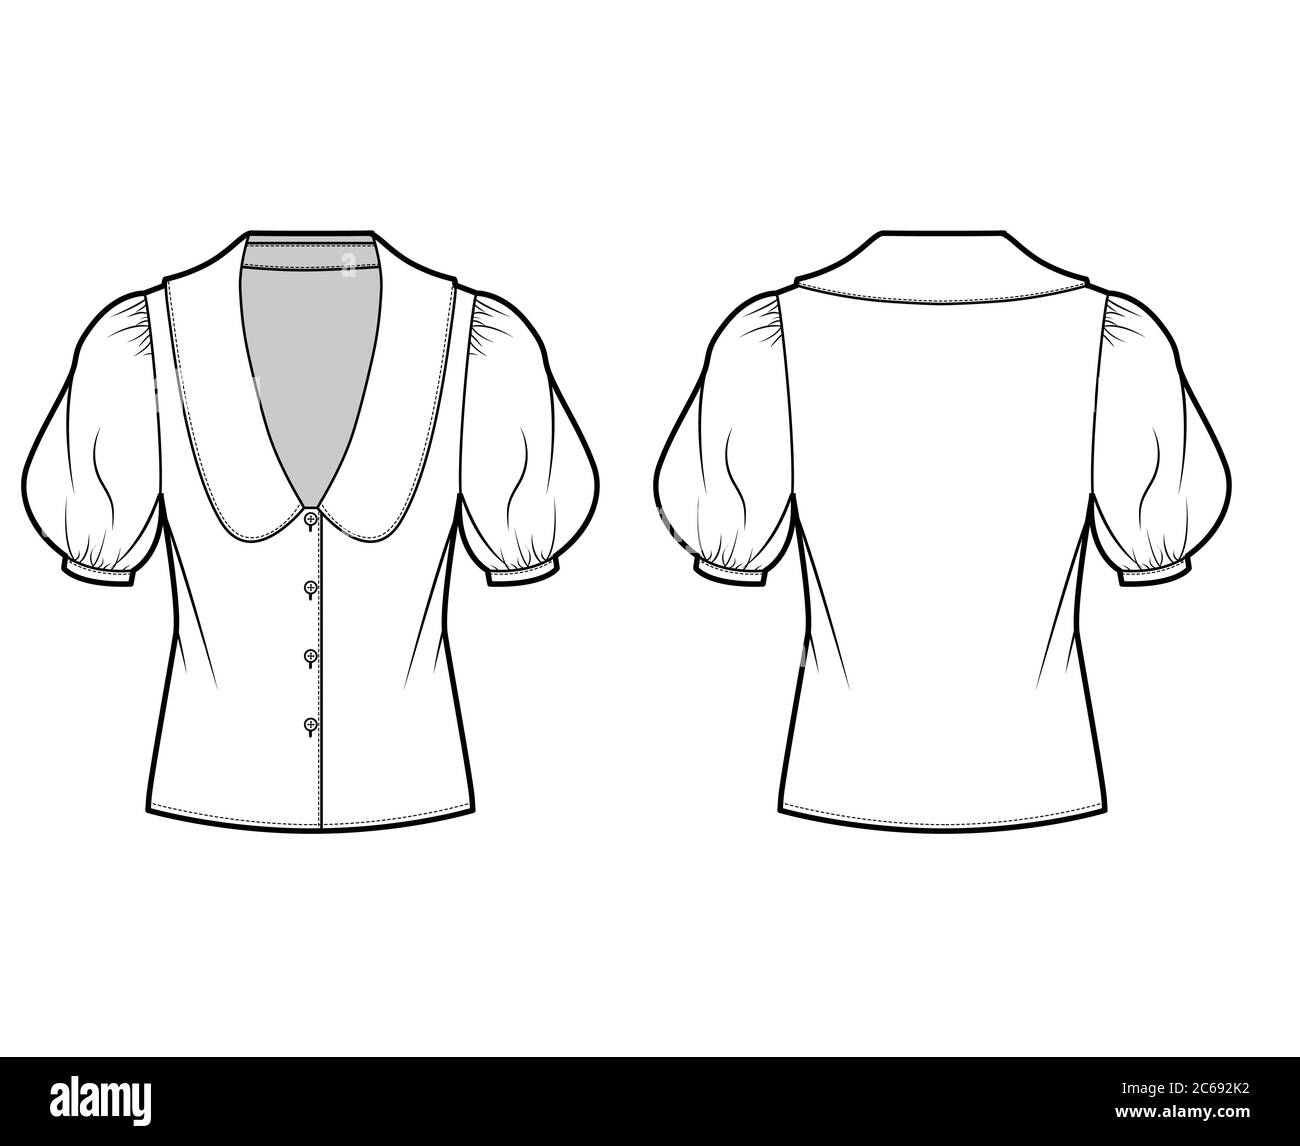 Blouse technical fashion illustration with collar framing V neck, oversized medium puffed sleeves and body. Flat apparel template front, back, white color. Women, men unisex garment CAD mockup Stock Vector